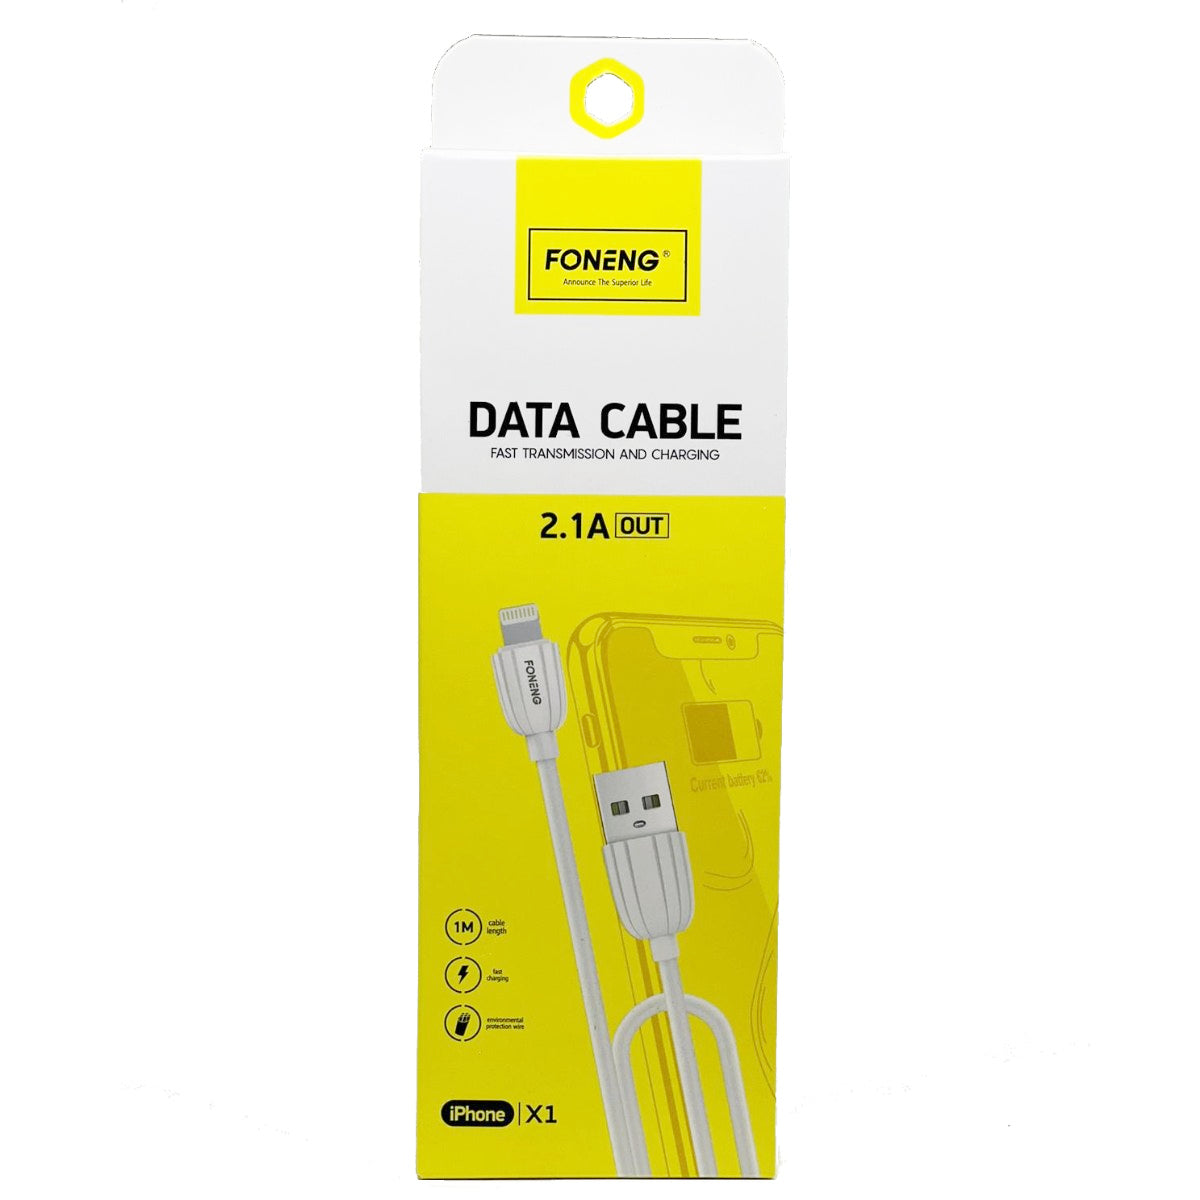 Data Cable X1 Lightening,Iphone 2.1A out | سلك ايفون من فونينج